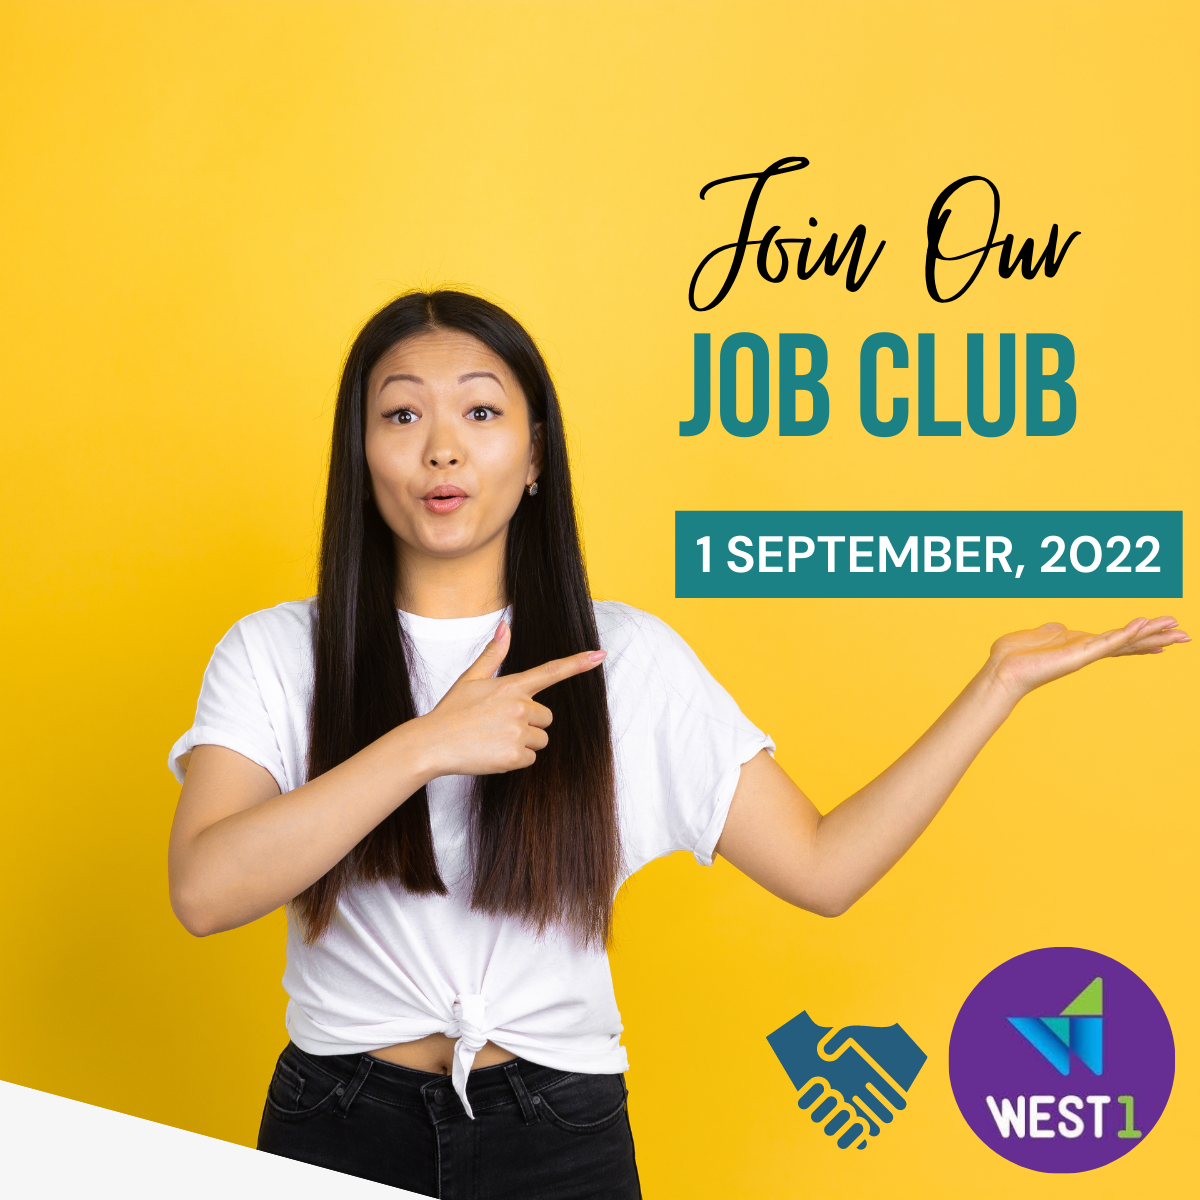 Job Club: How to find a job in Adelaide